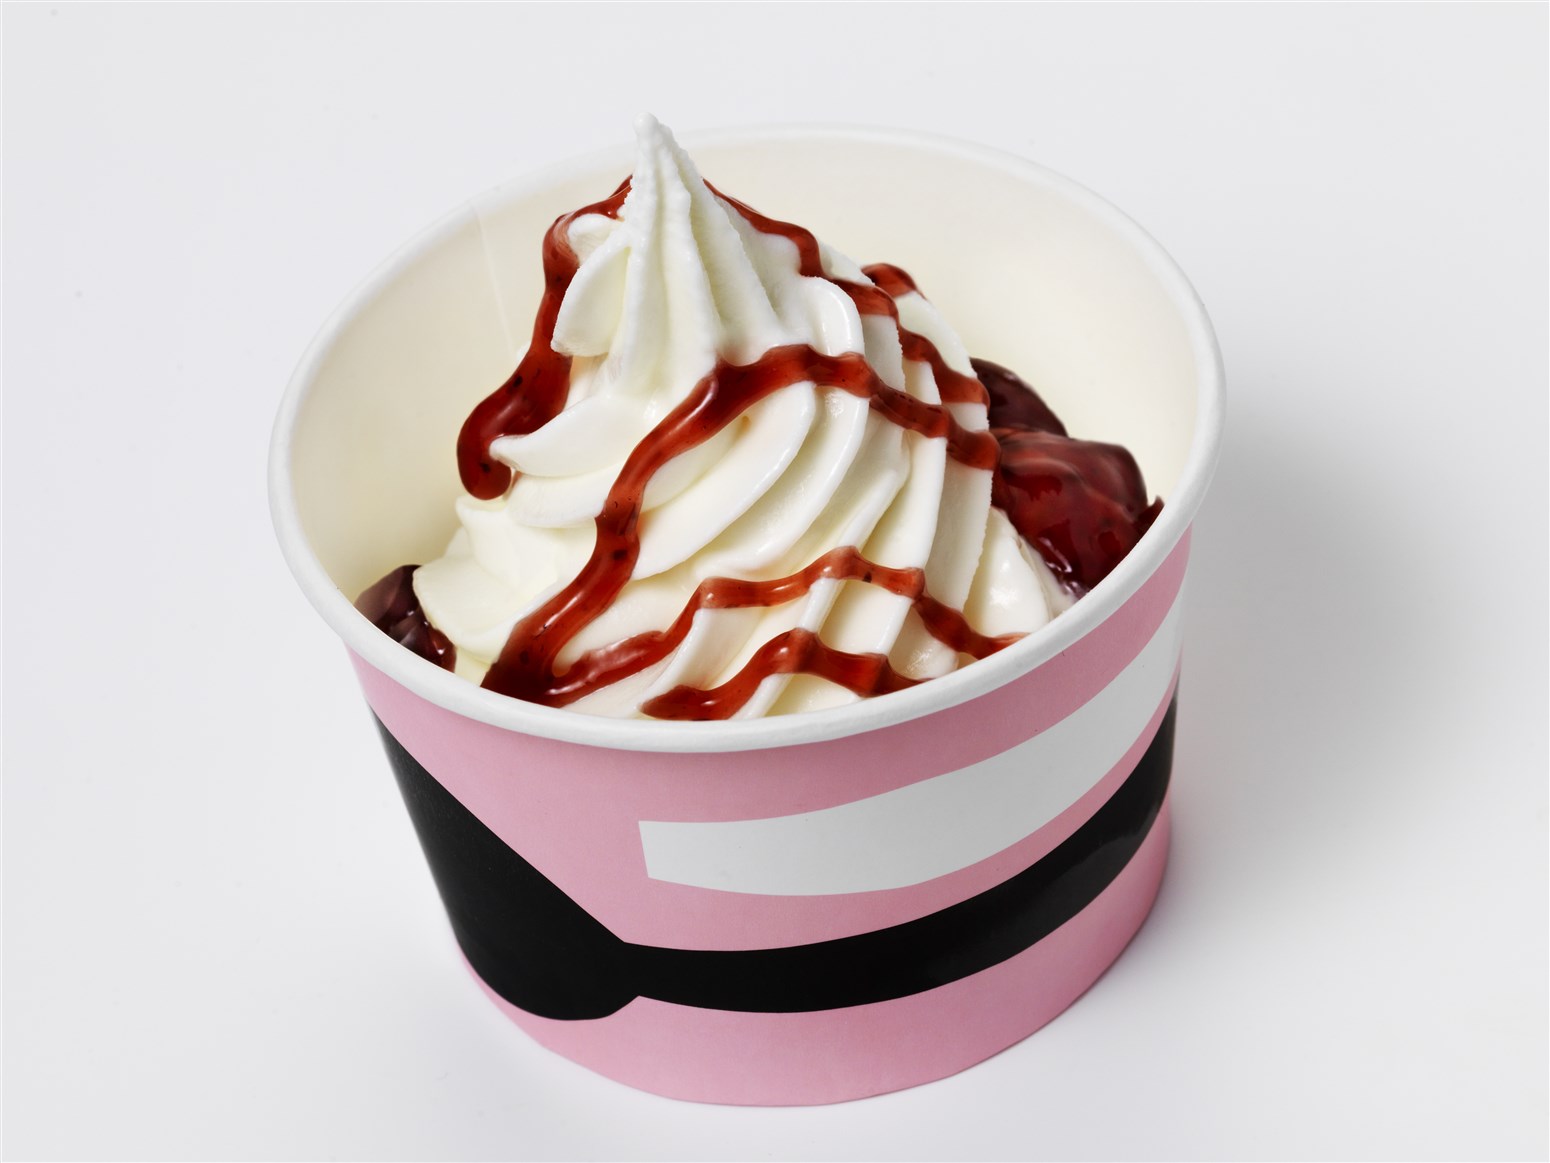 Habitat Socialisme Slagschip You Can Now Get Frozen Yoghurt From IKEA For Less Than RM2 Per Cup